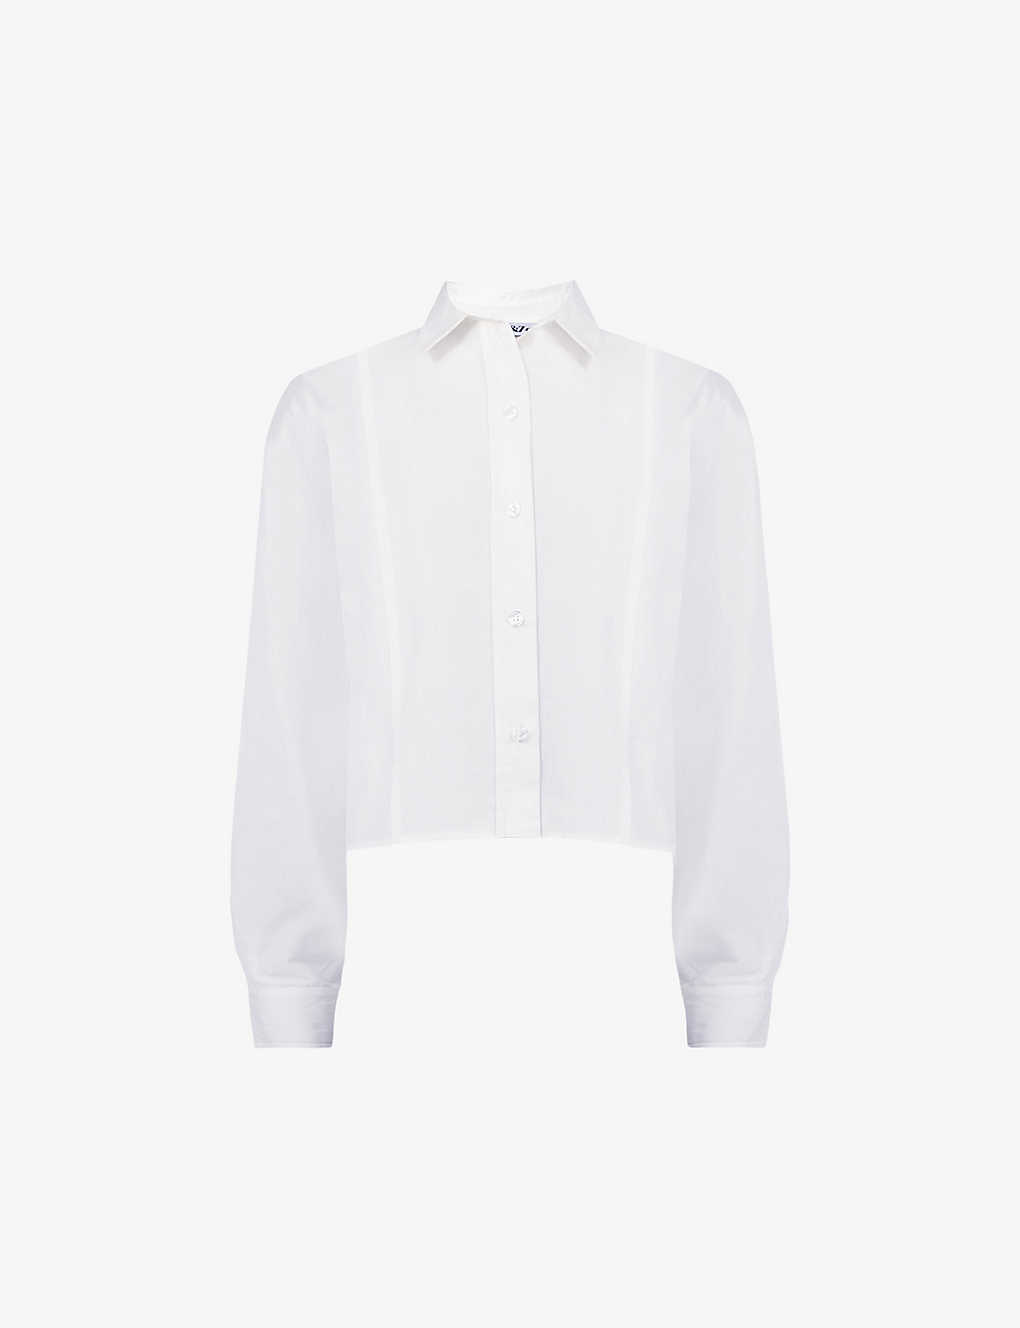 Ro&zo Pleated Cropped Cotton Shirt In White